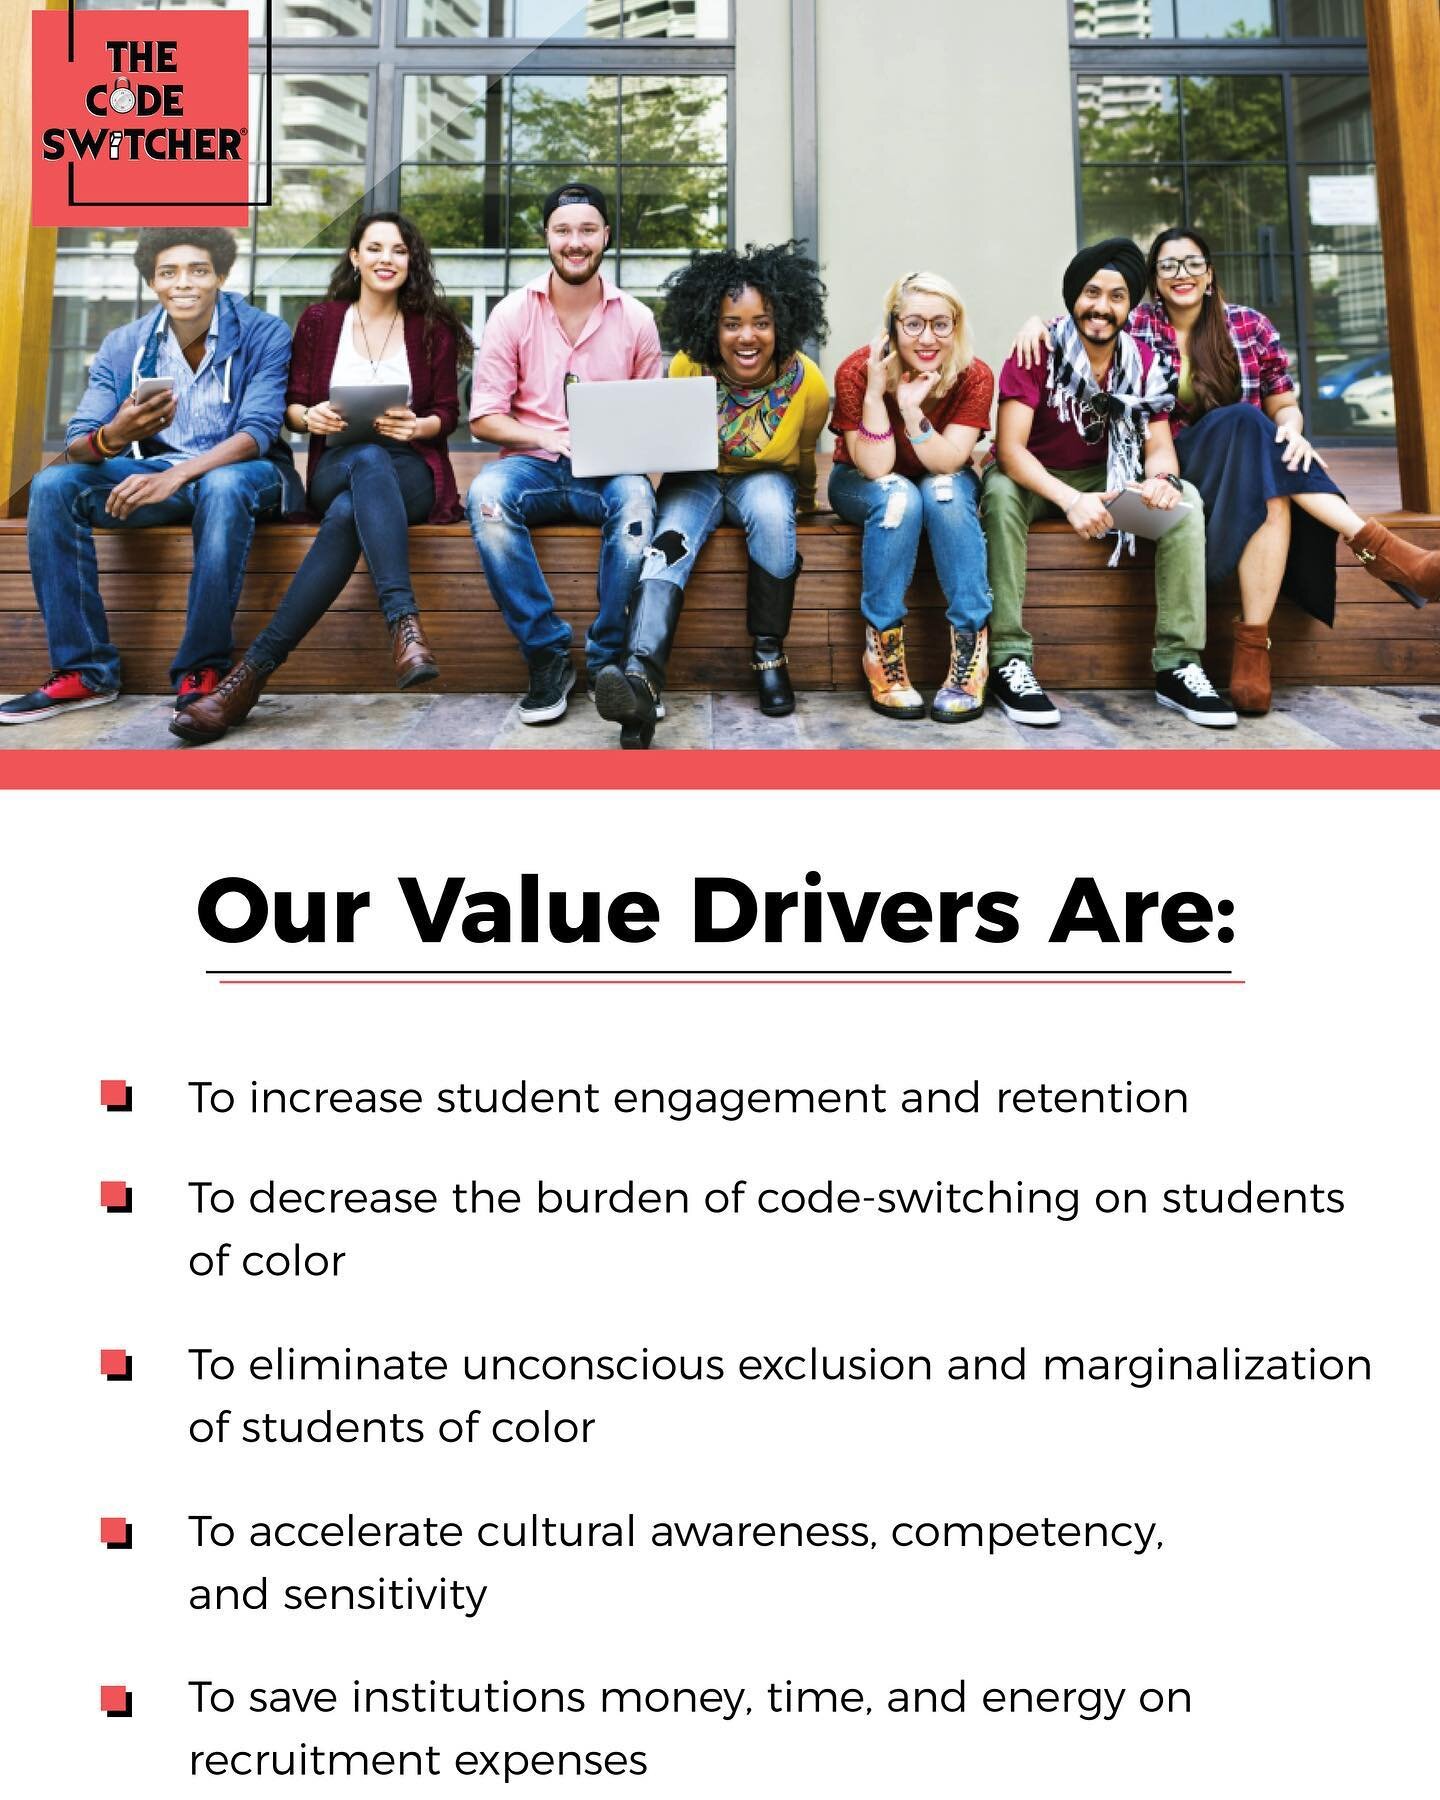 Our goal is to increase the attraction, retention, and graduation rates of students of color while helping institutions save money and reduce their overall recruitment expenses. 

#georgepaasewe 
#thecodeswitcher 
#diversitytraining 
#diversityandinc